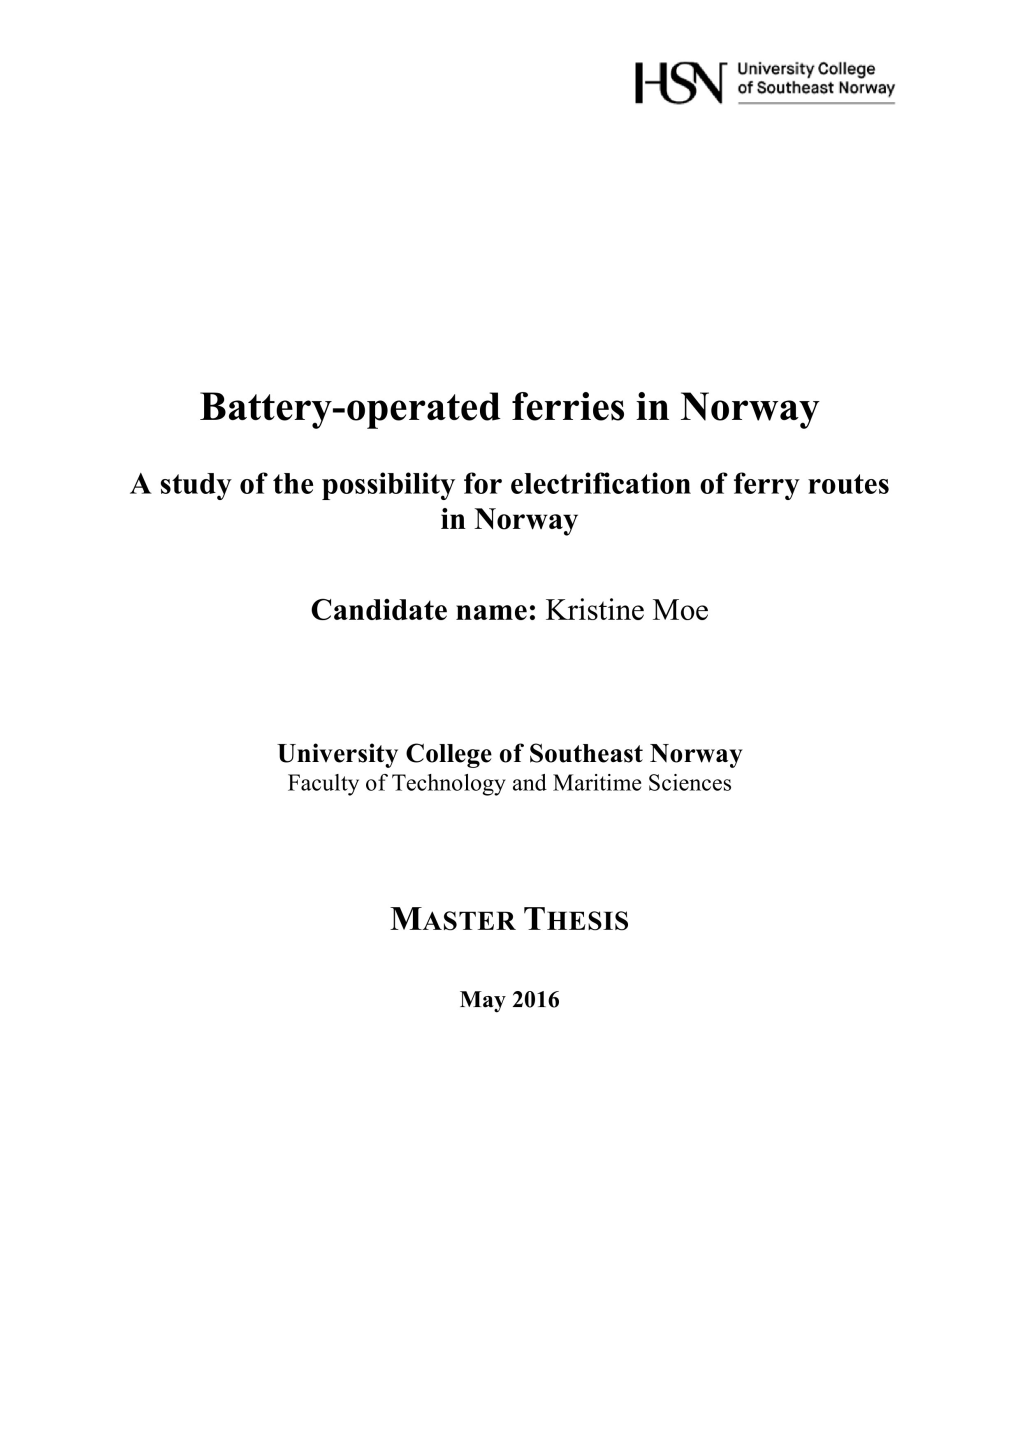 Battery - Operated Ferries in Norway